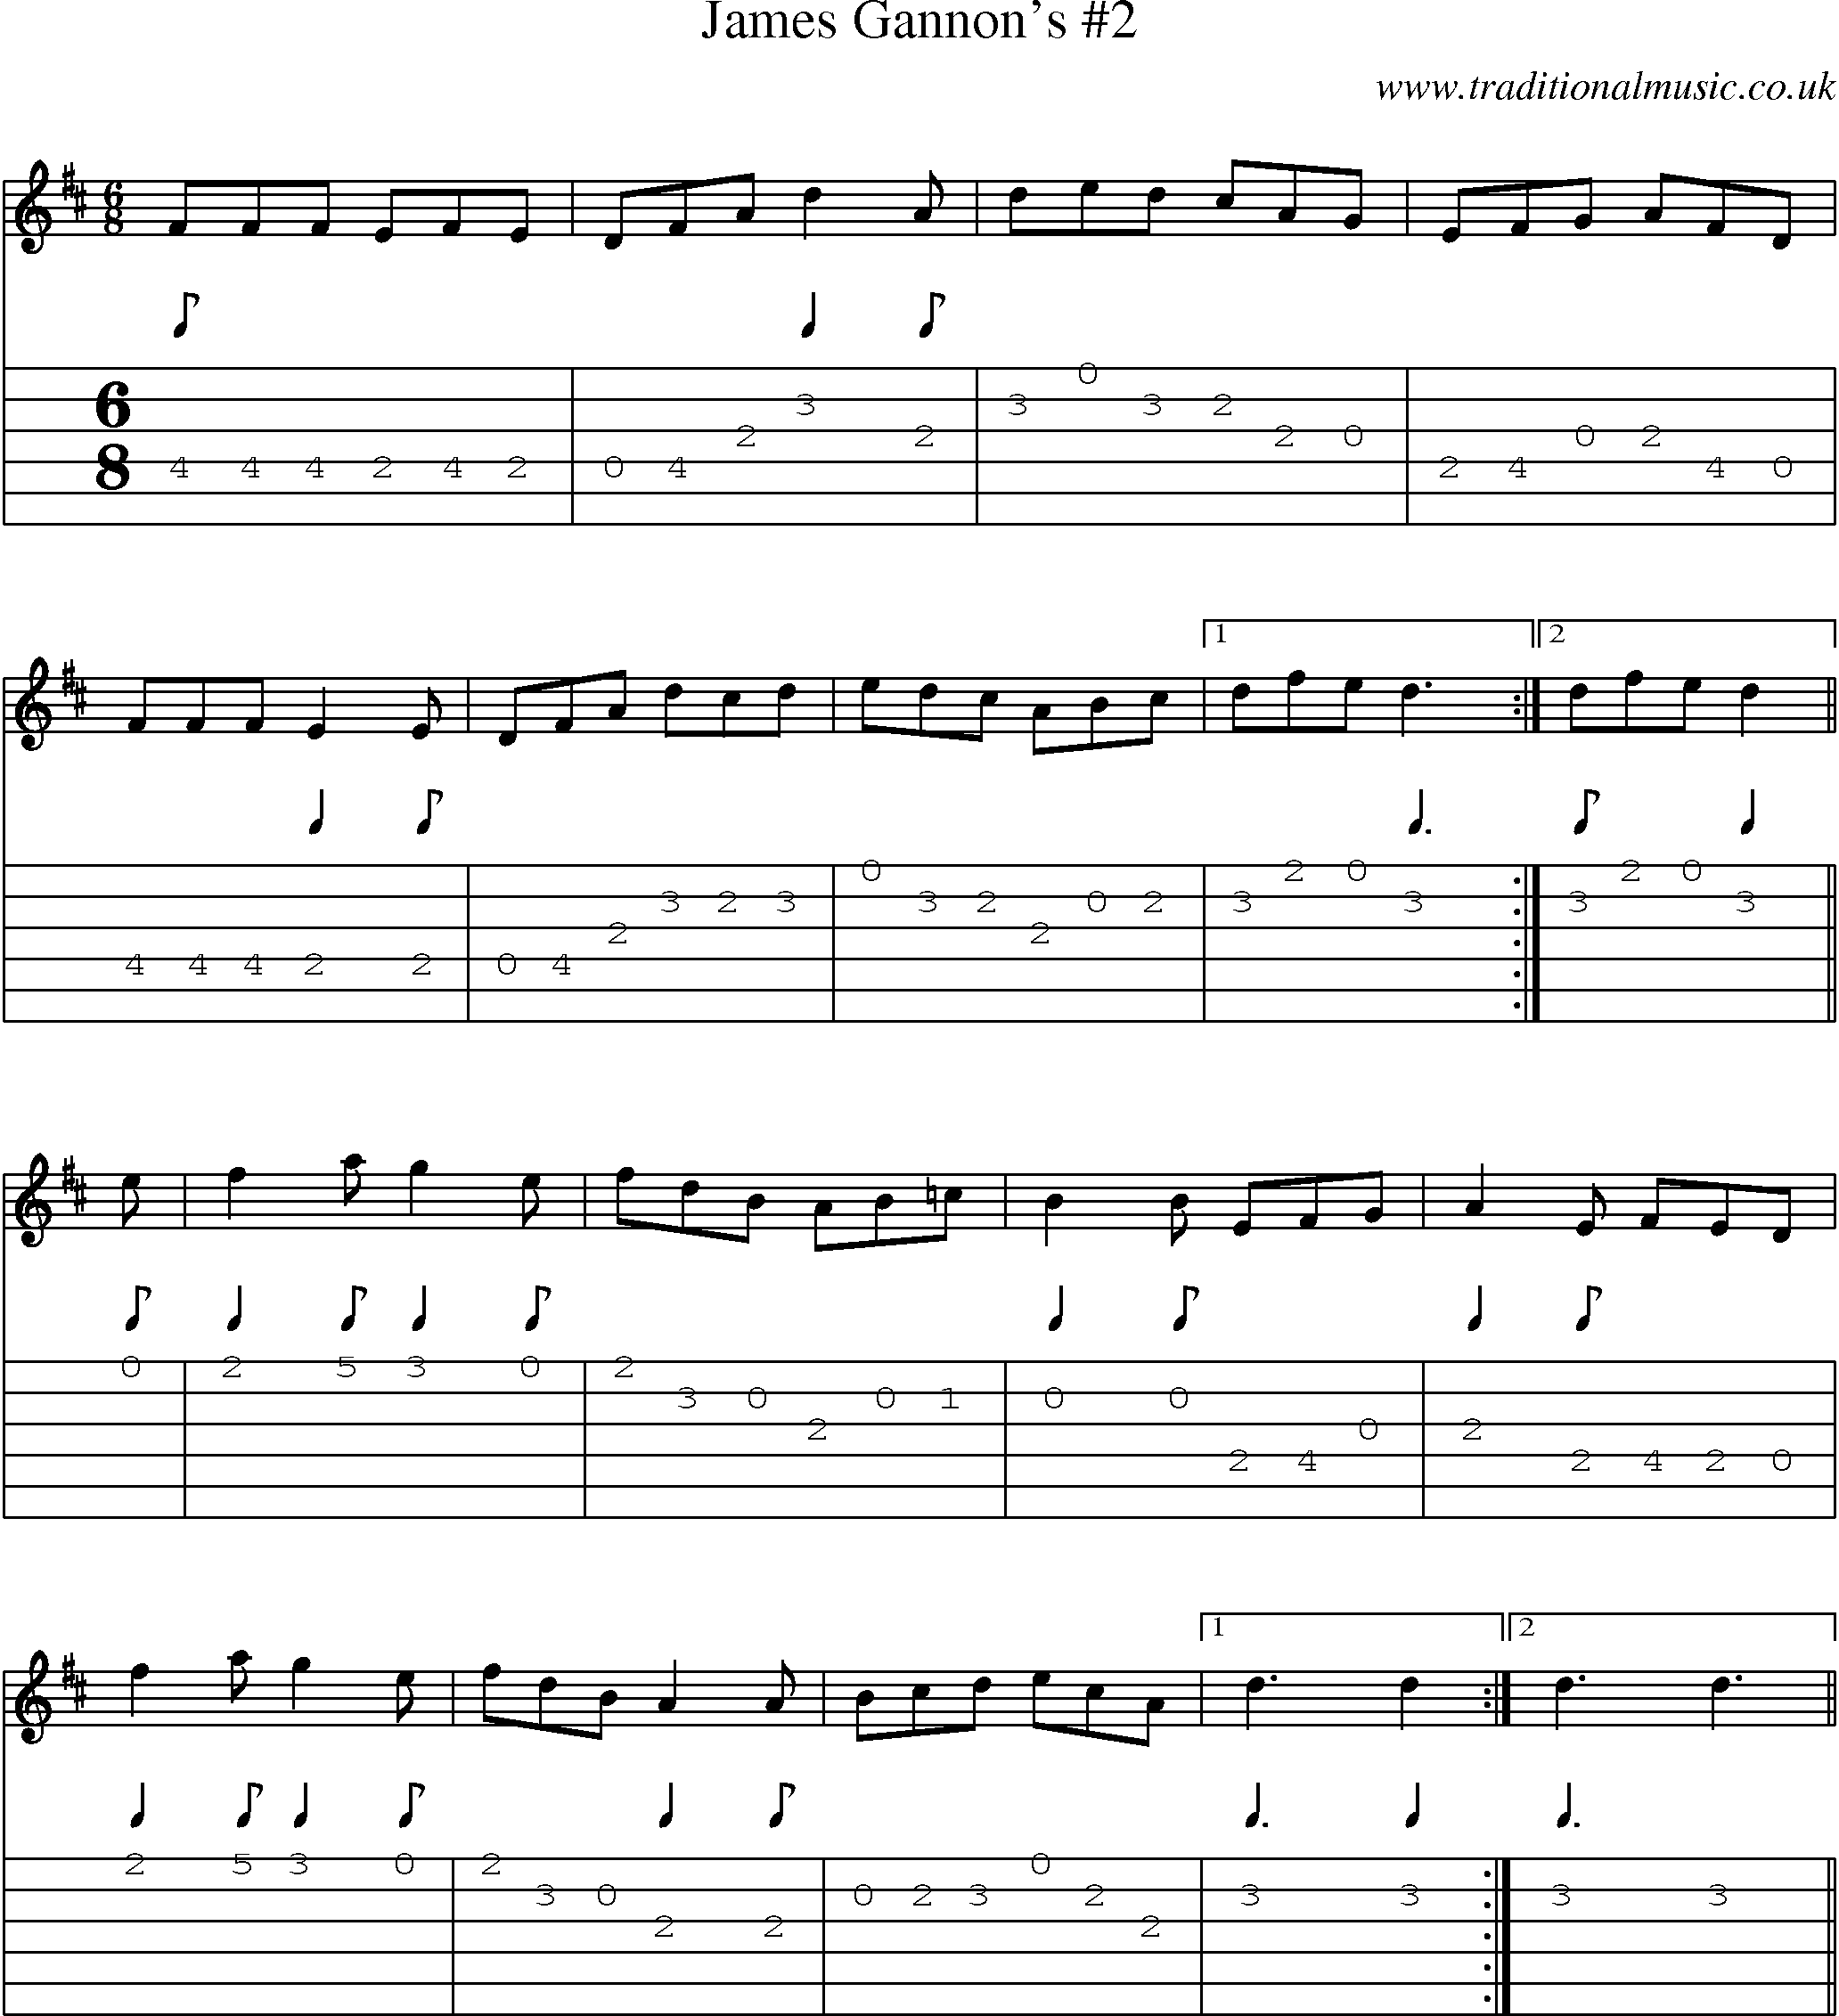 Music Score and Guitar Tabs for James Gannons 2